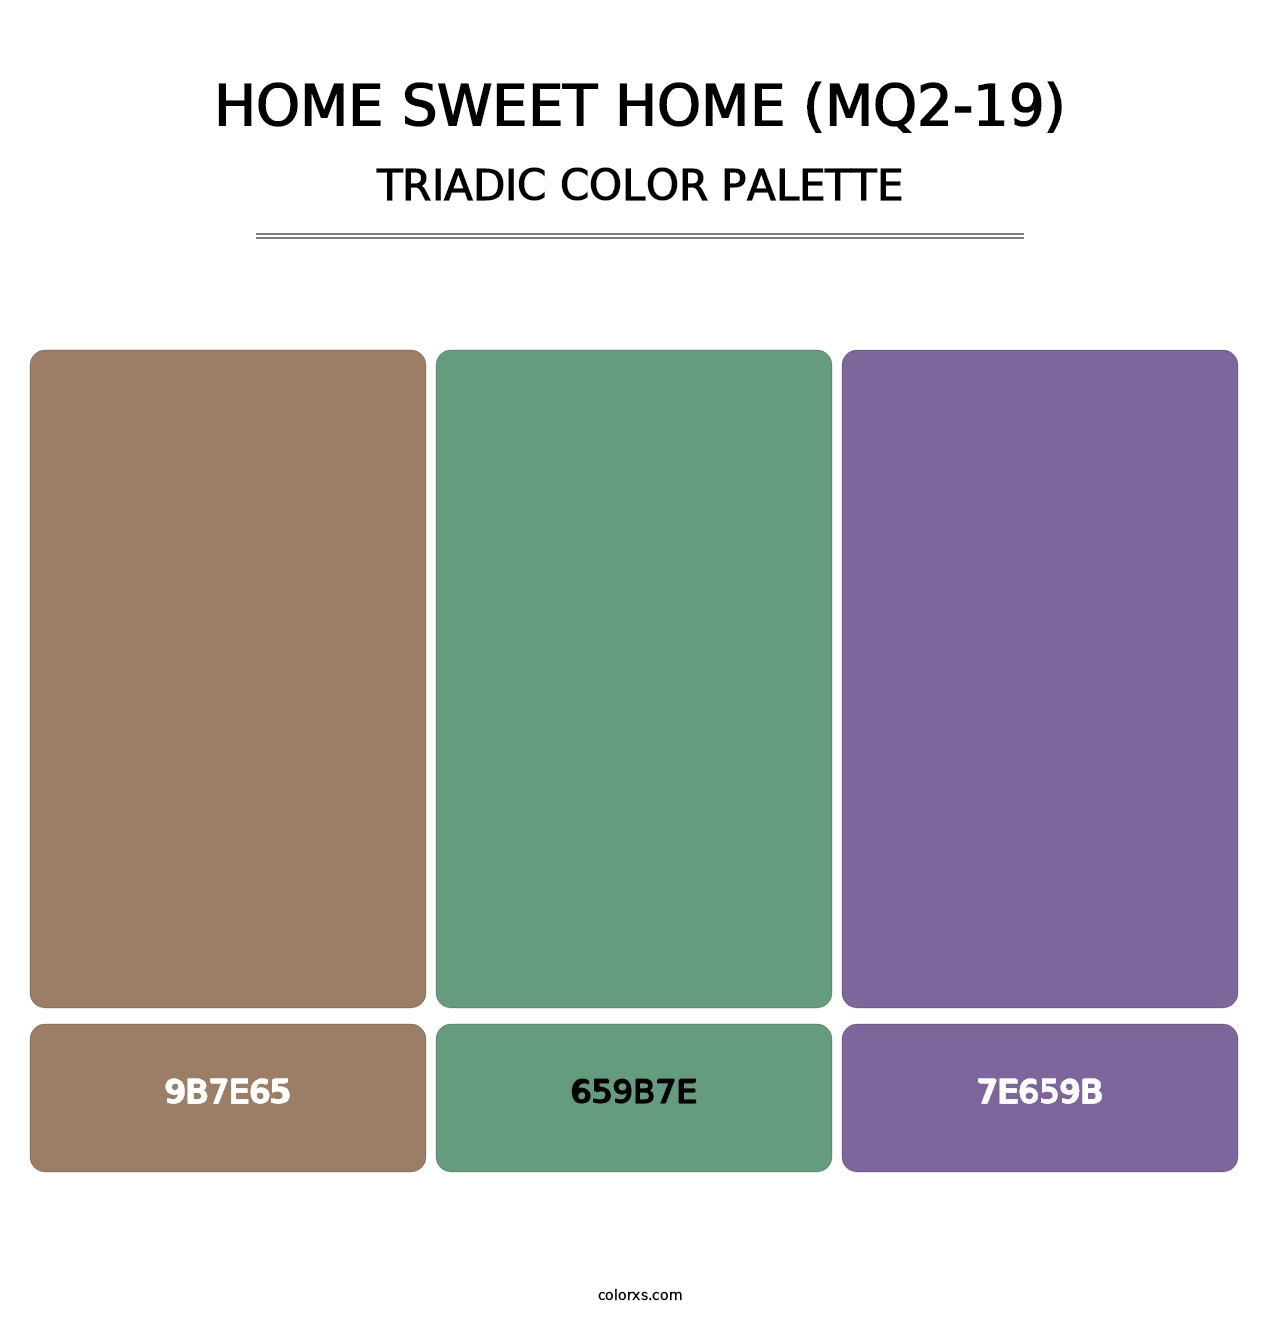 Home Sweet Home (MQ2-19) - Triadic Color Palette